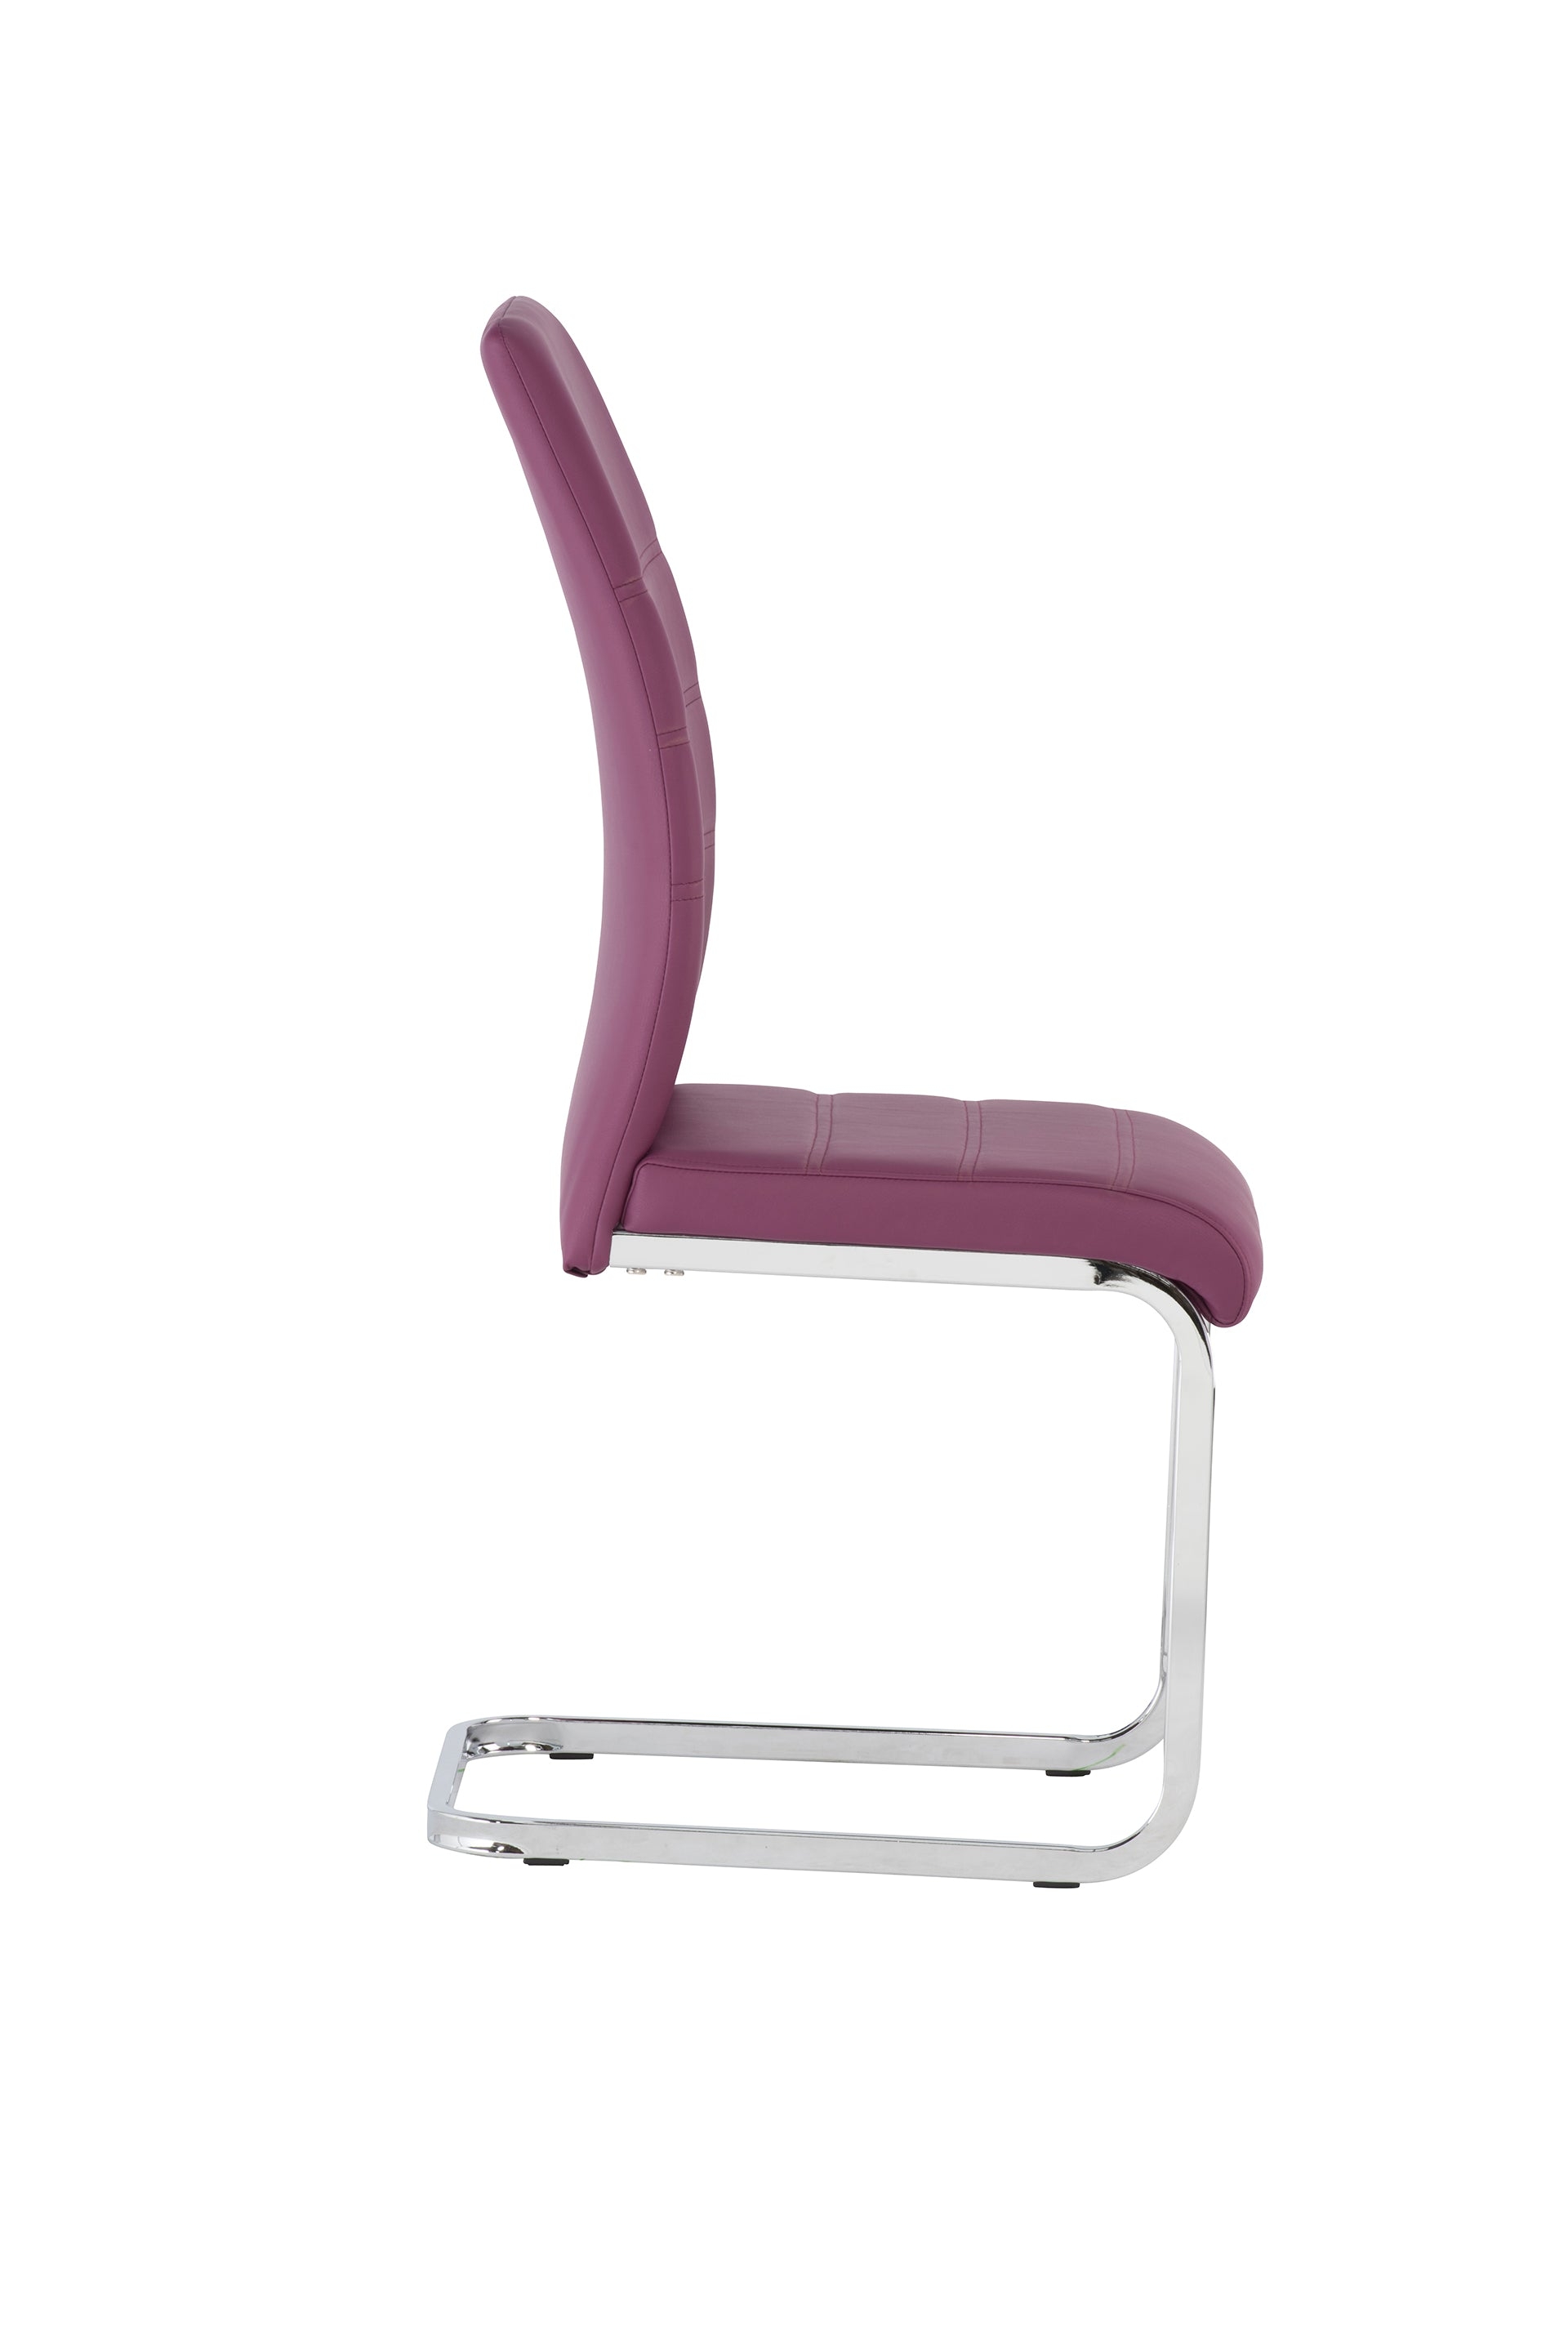 Soho Pu With Stainless Steel Cantilever Base Dining Chair (Pairs), PURPLE – Lc Living